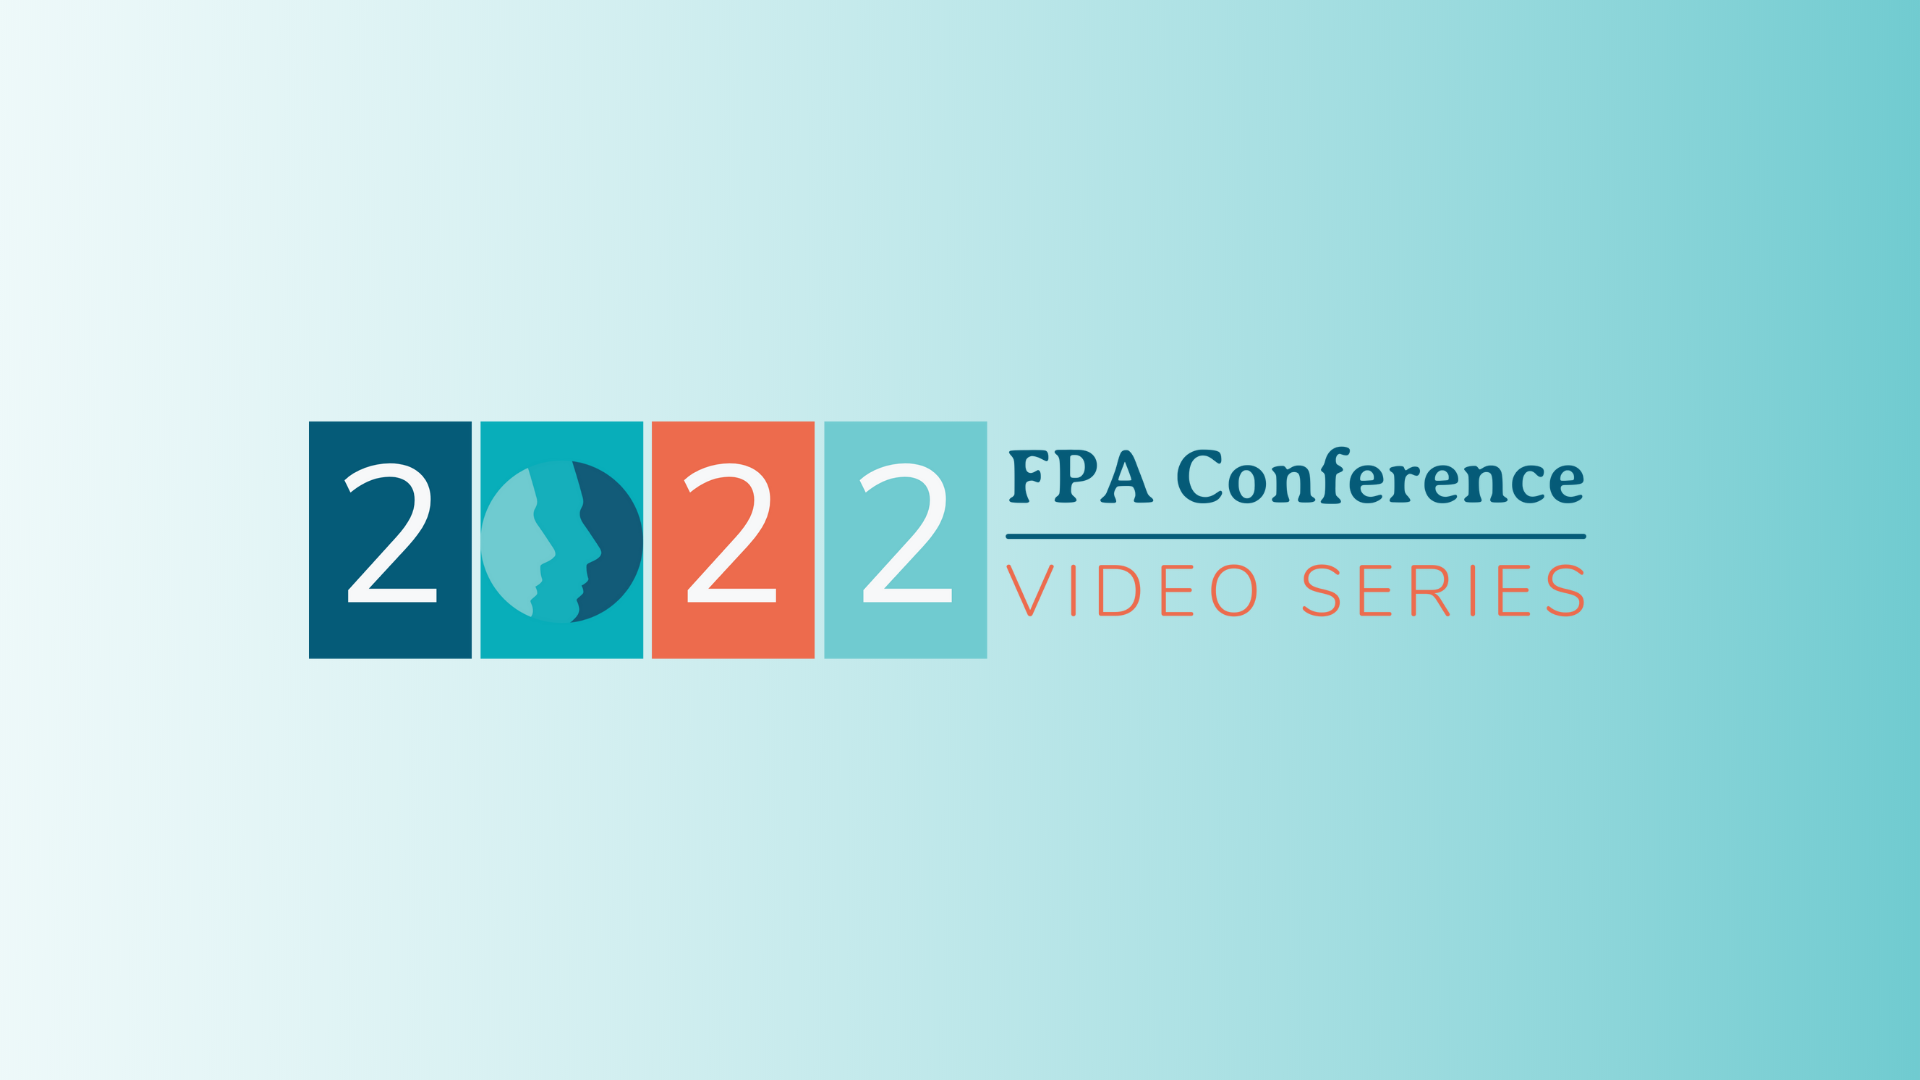 Radiation Treatment for Facial Pain | 2022 FPA Conference Video Series